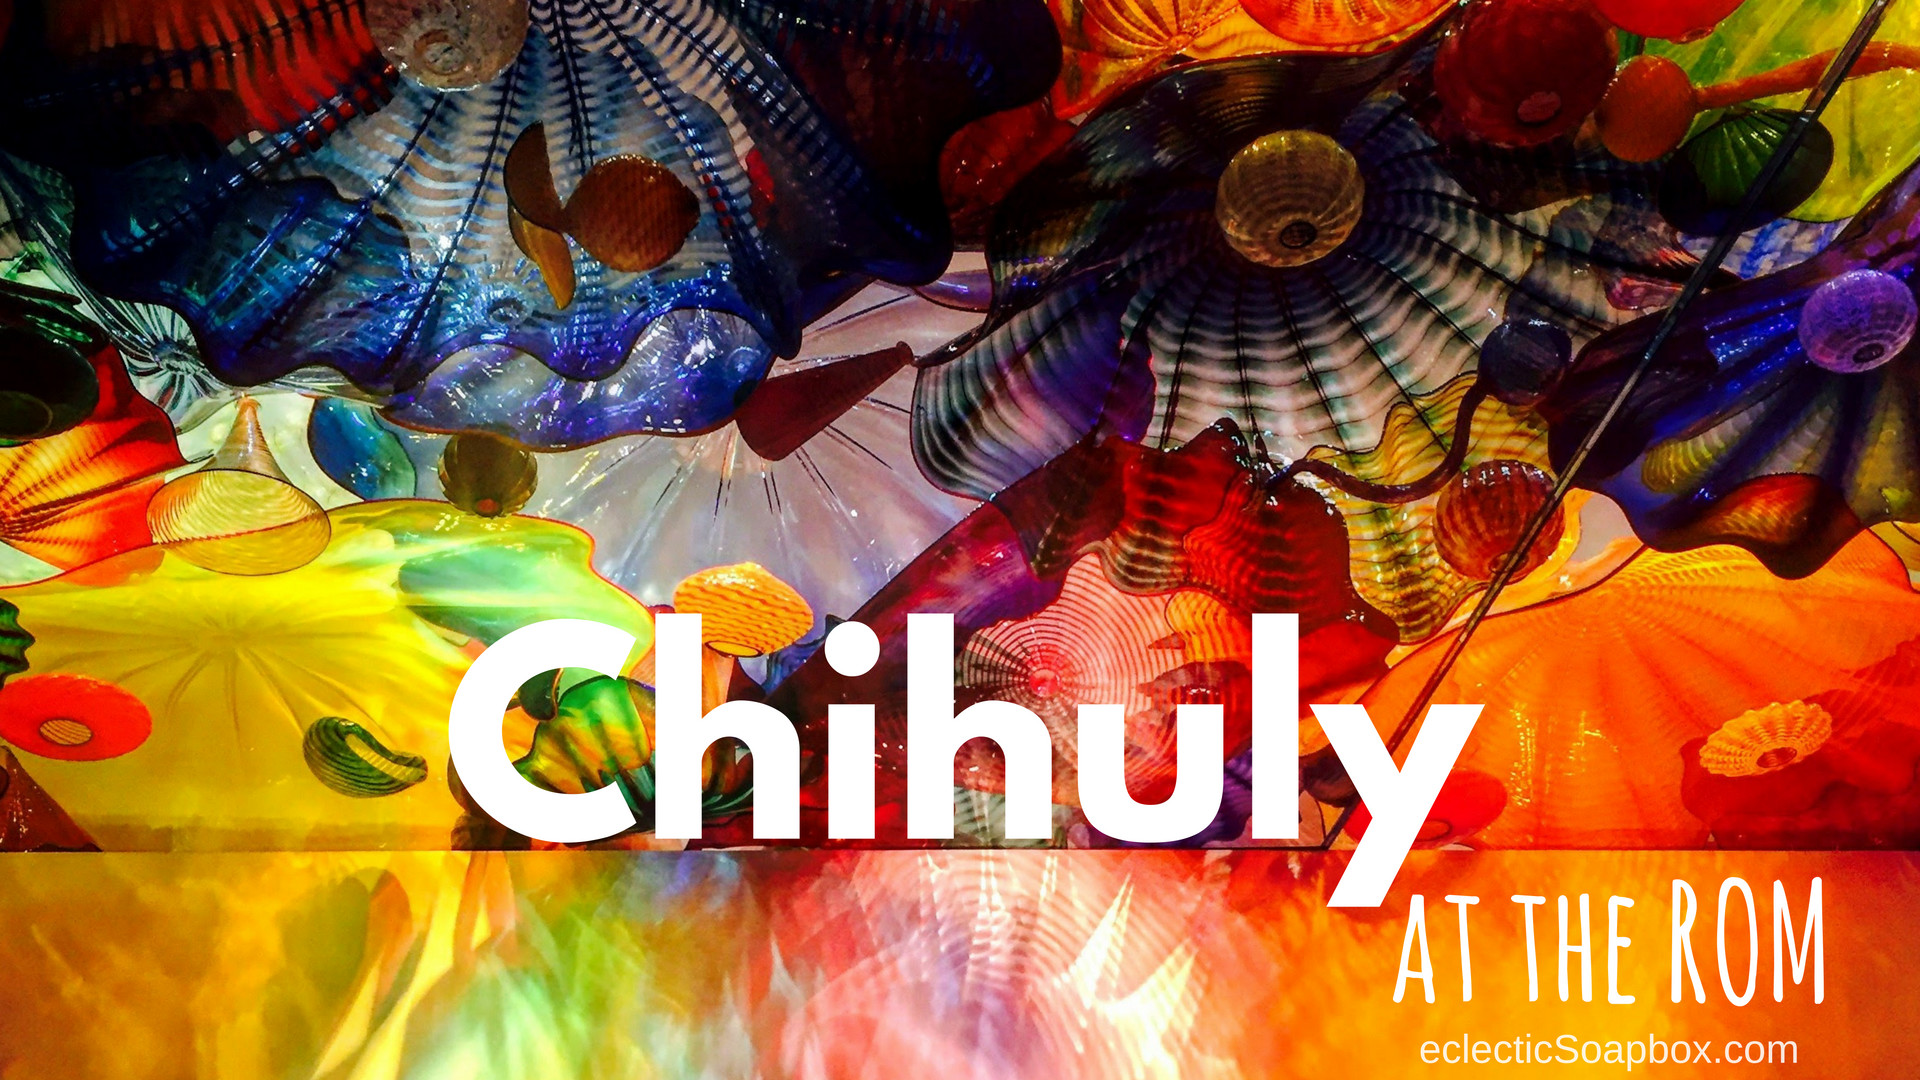 1920x1080 Dale Chihuly Exhibit at the ROM